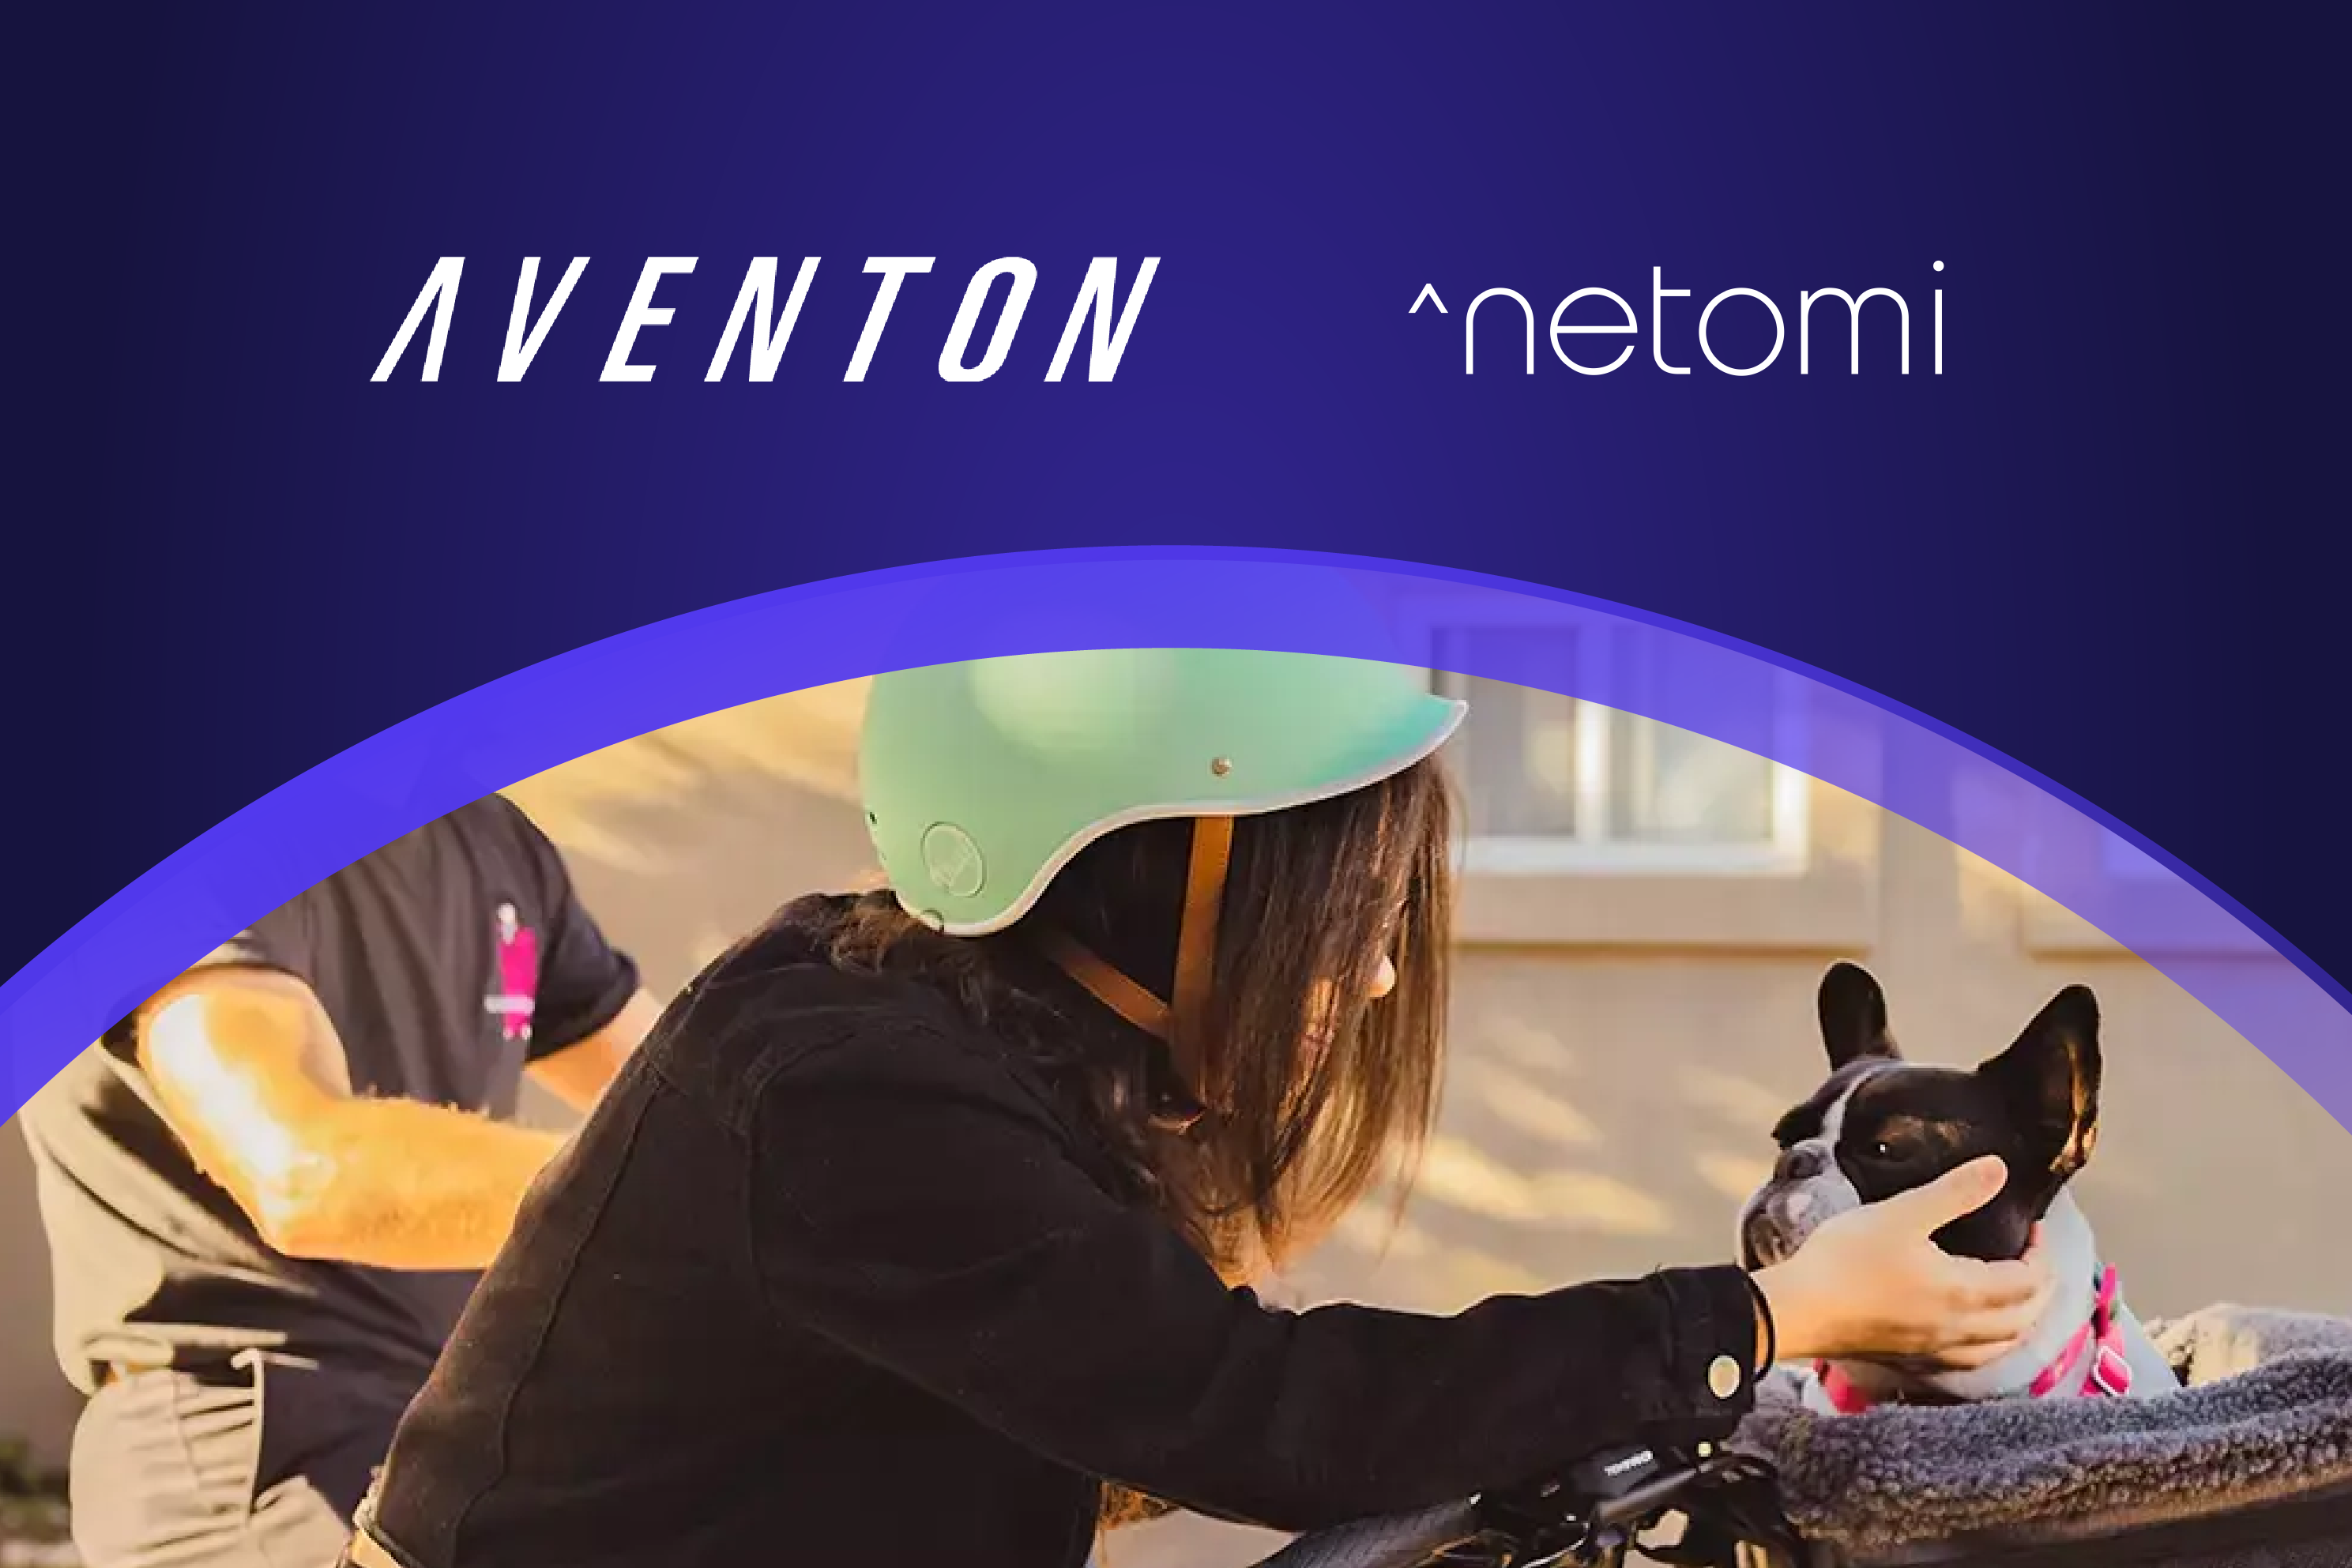 Aventon Bolts Ahead with Customer Support, with Rapid Results